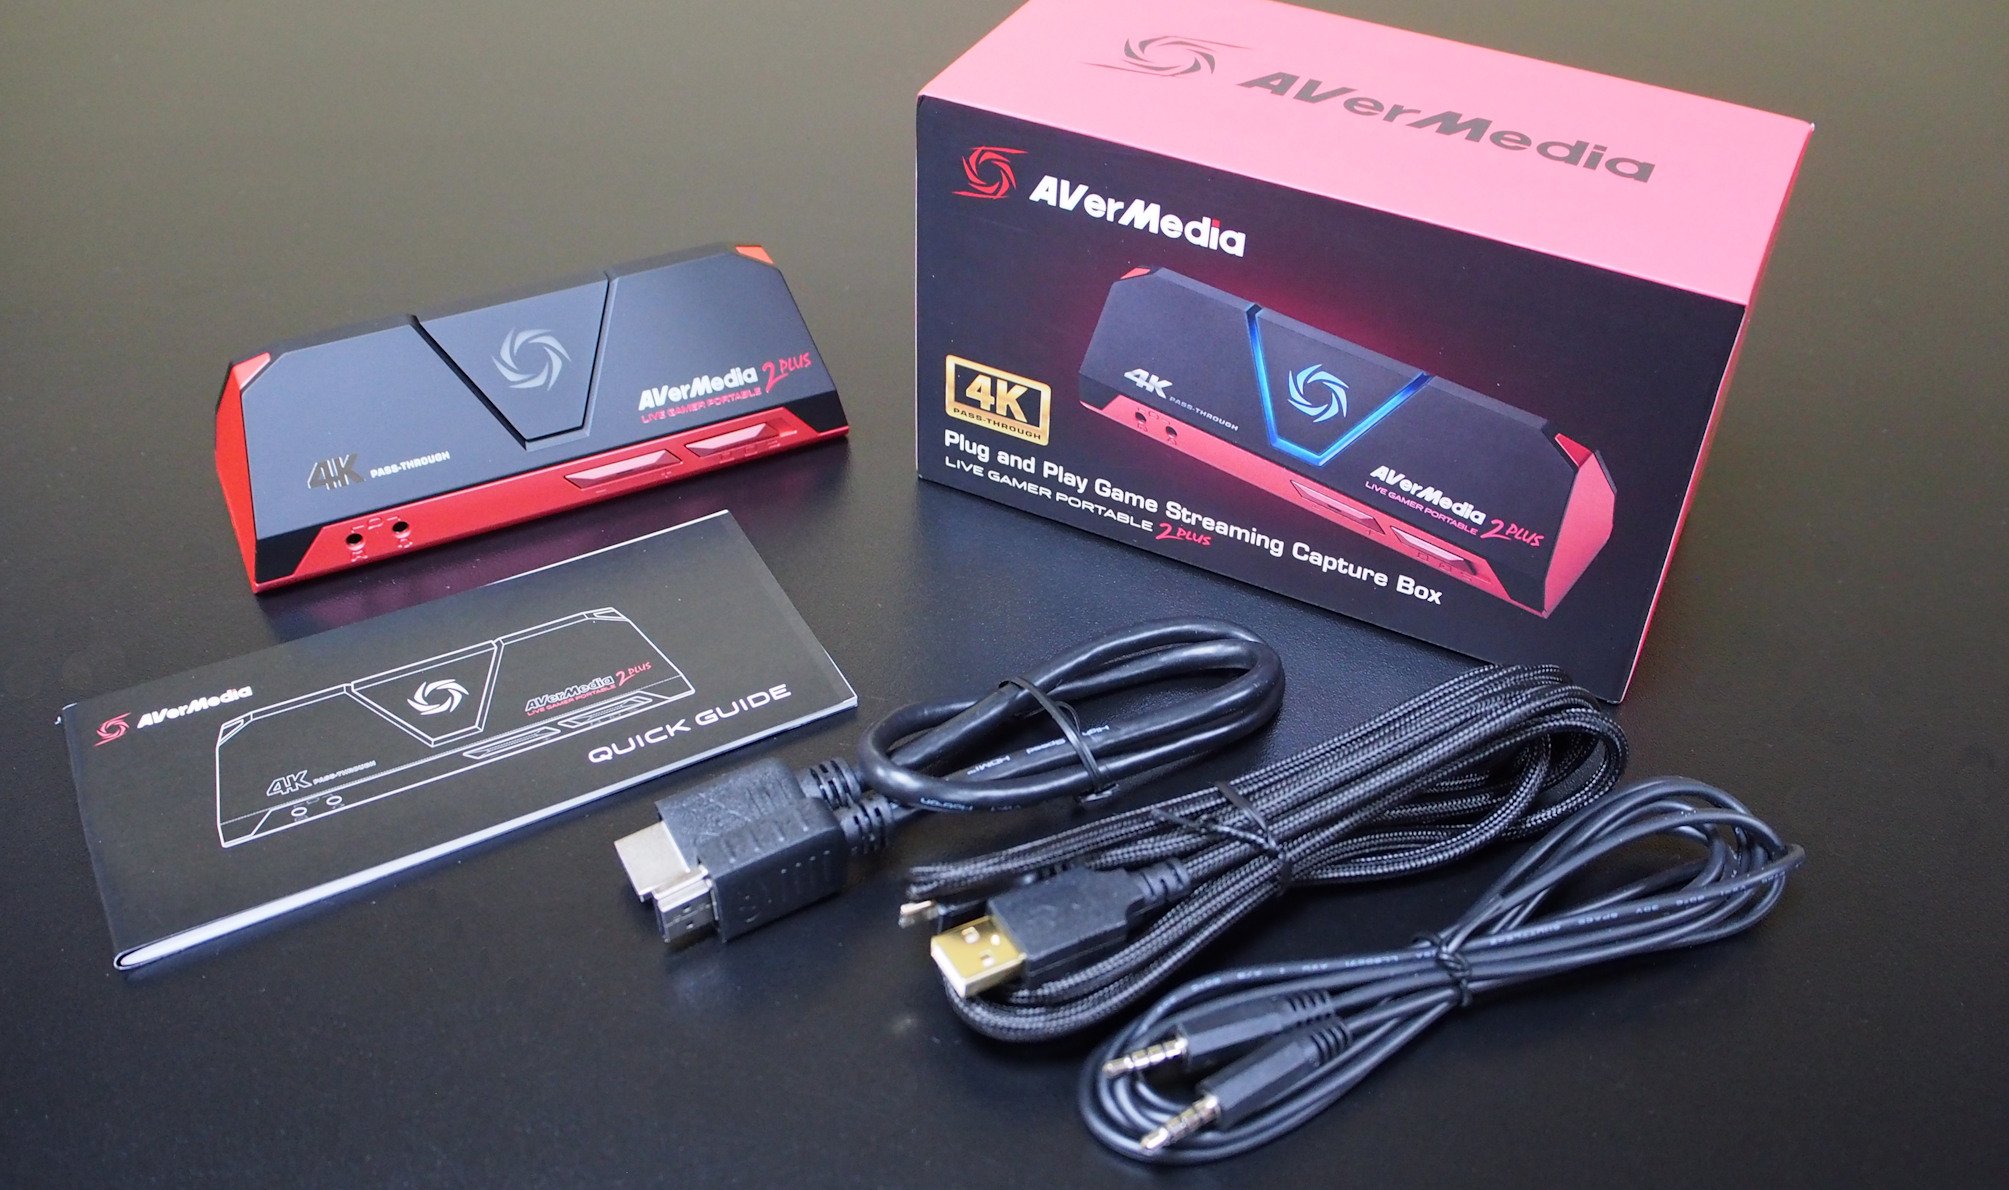 AVerMedia Live Gamer Portable 2 Plus capture device has 4K passthrough and PC-free mode